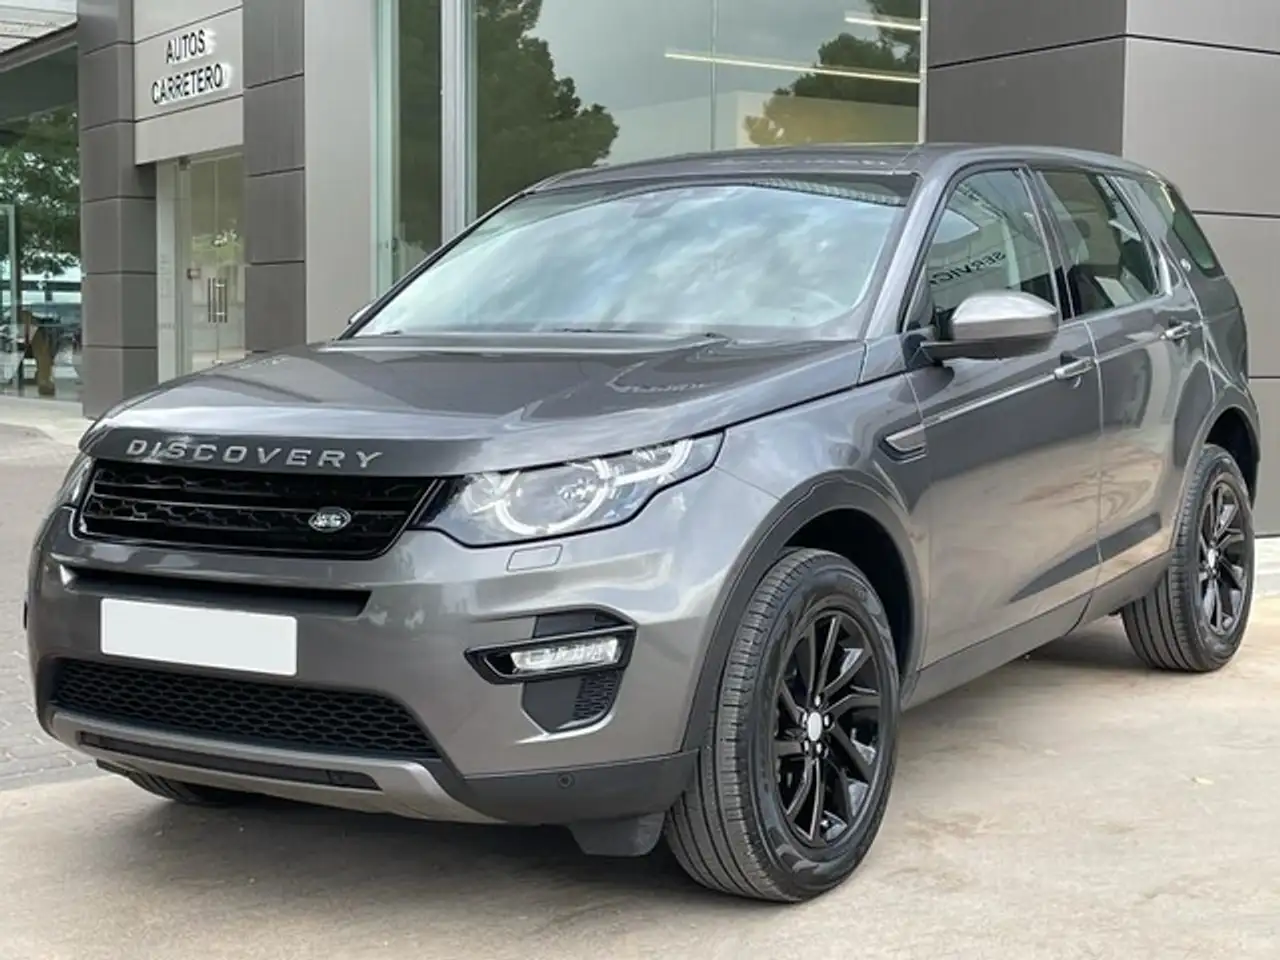  Renting Land Rover Discovery Sport 2.0L TD4 110kW (150CV) 4×4 SE Gris